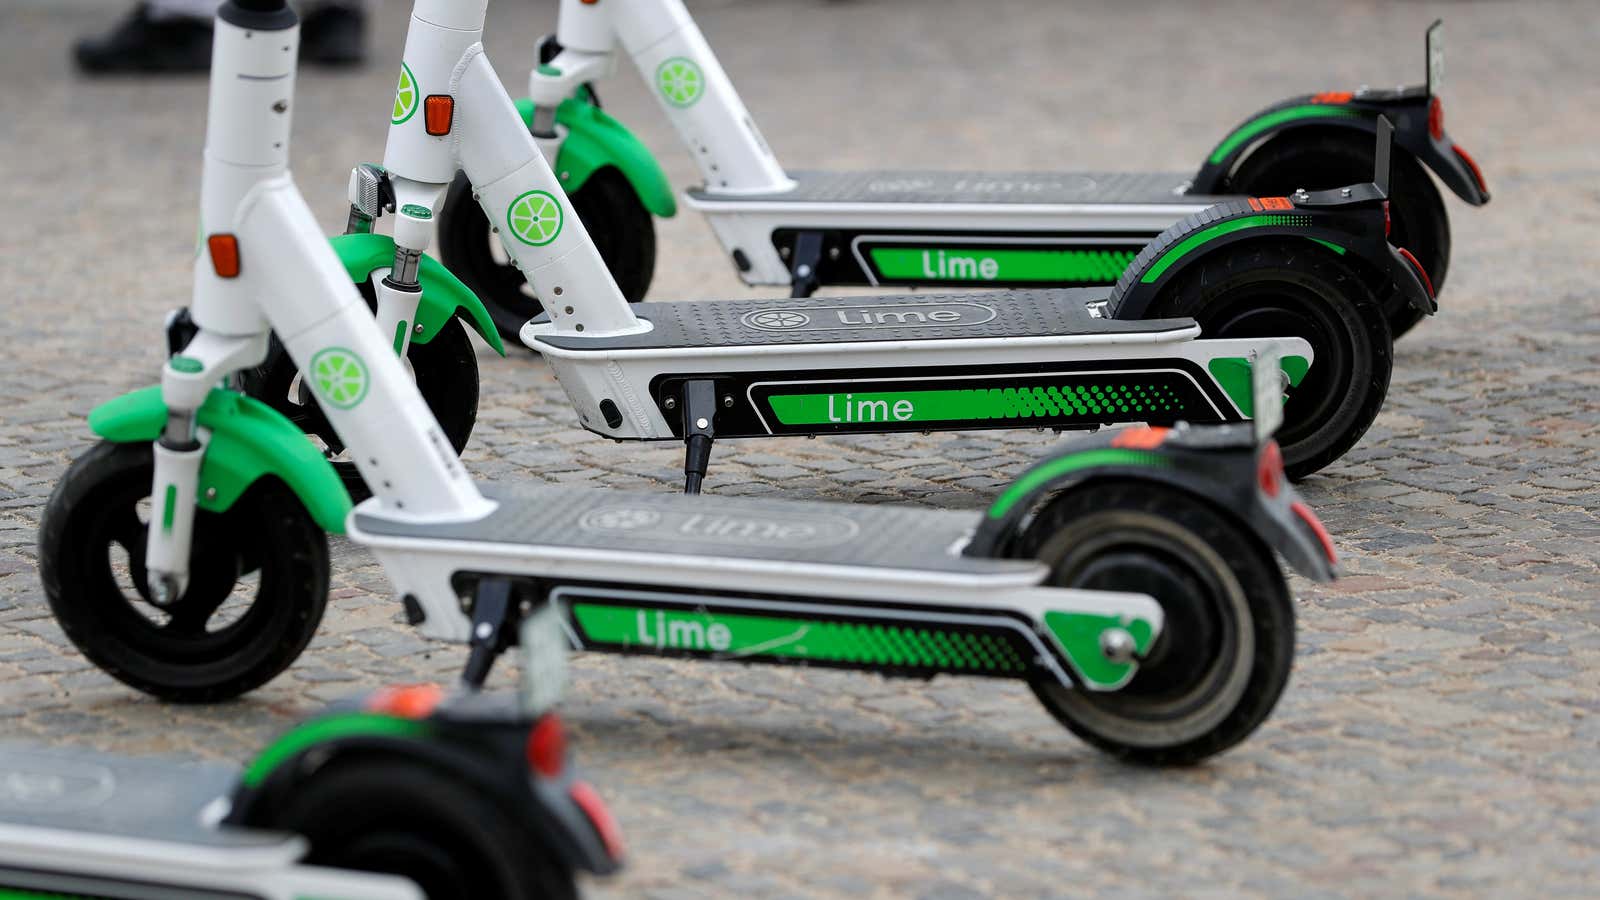 Lime electric scooters.